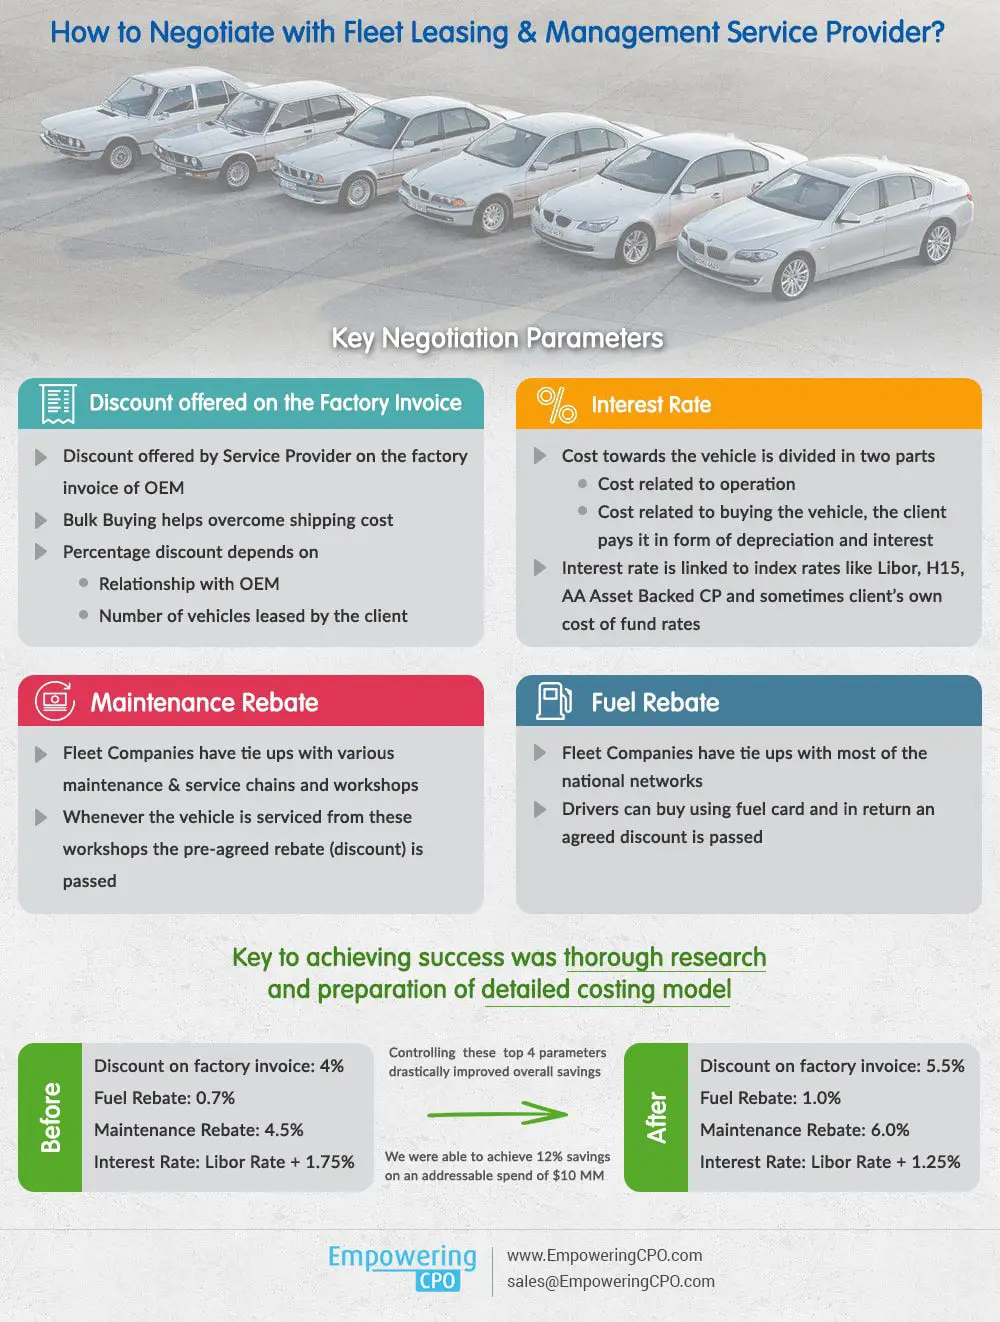 Infographic detailing negotiation strategies with fleet leasing and management providers, highlighting areas of focus and showcasing achieved savings.